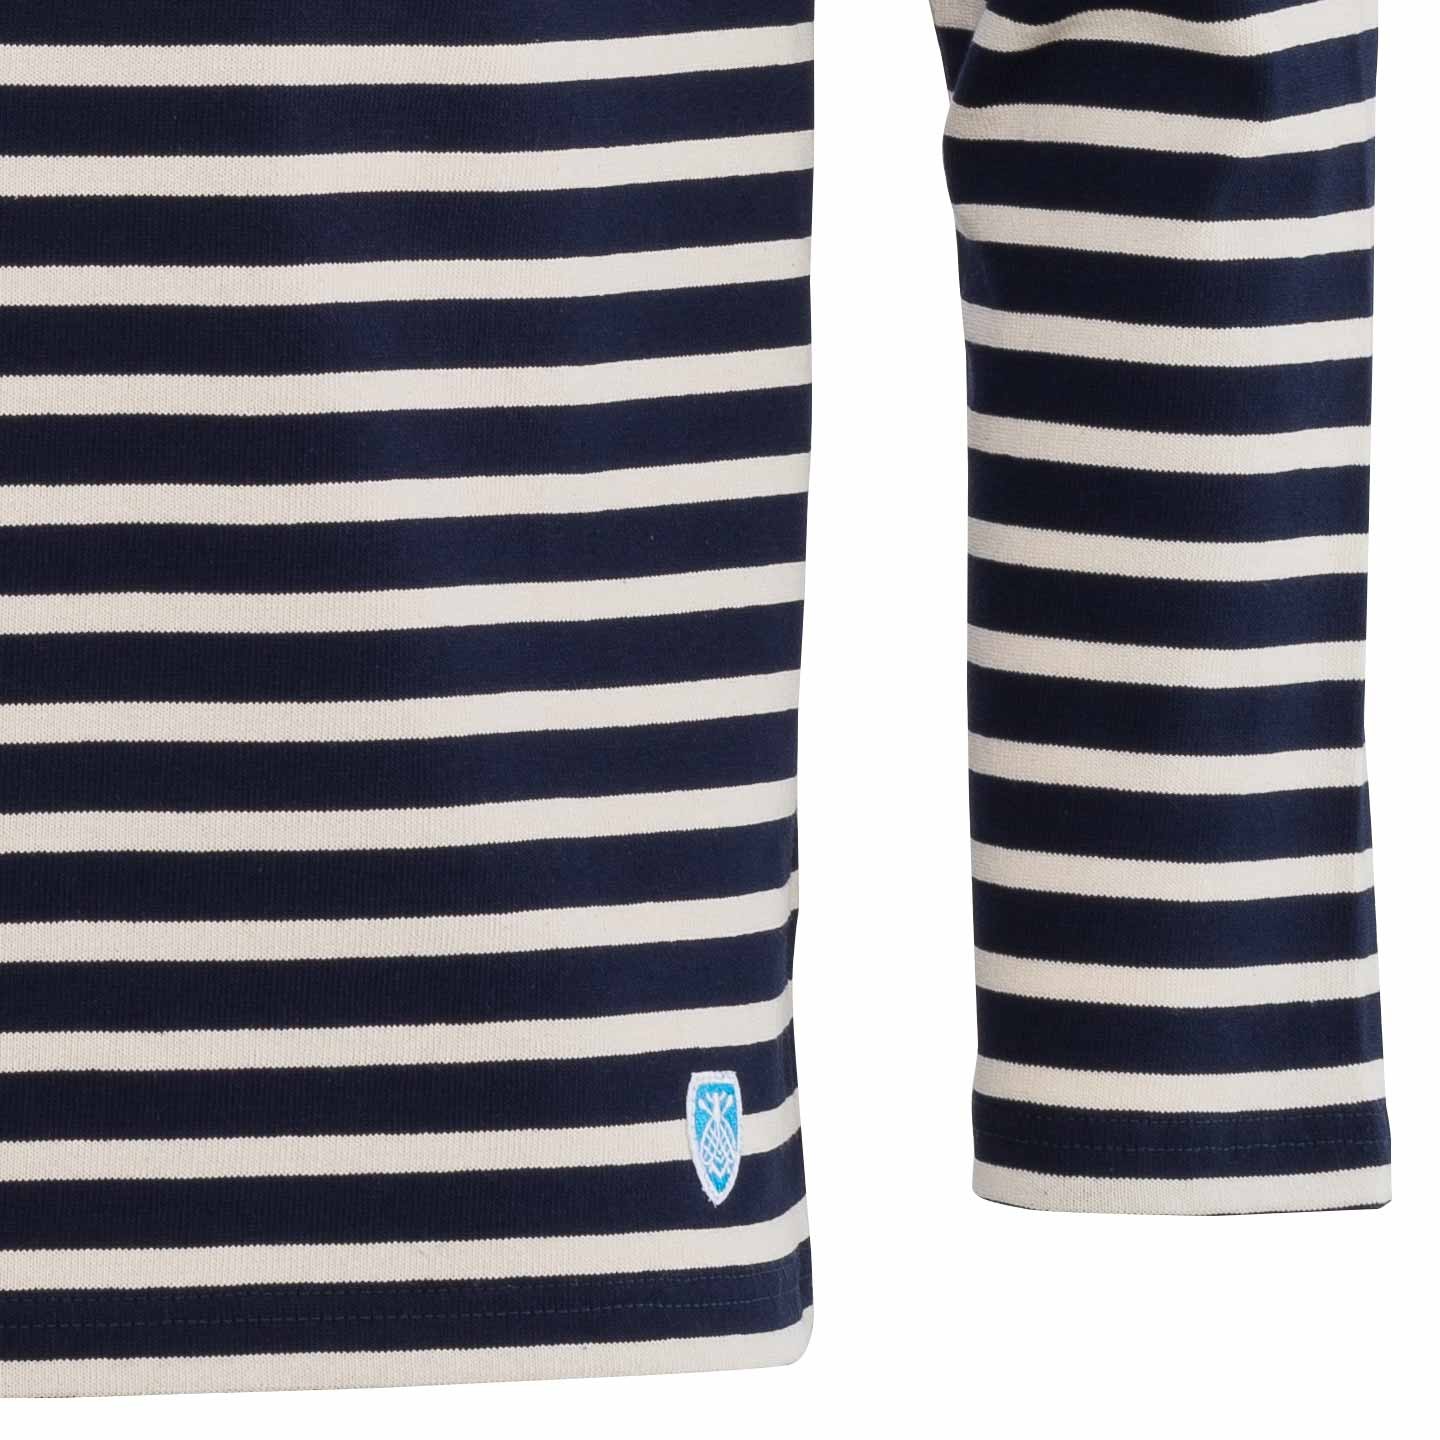 Striped shirt Navy / Écru, unisex made in France Orcival